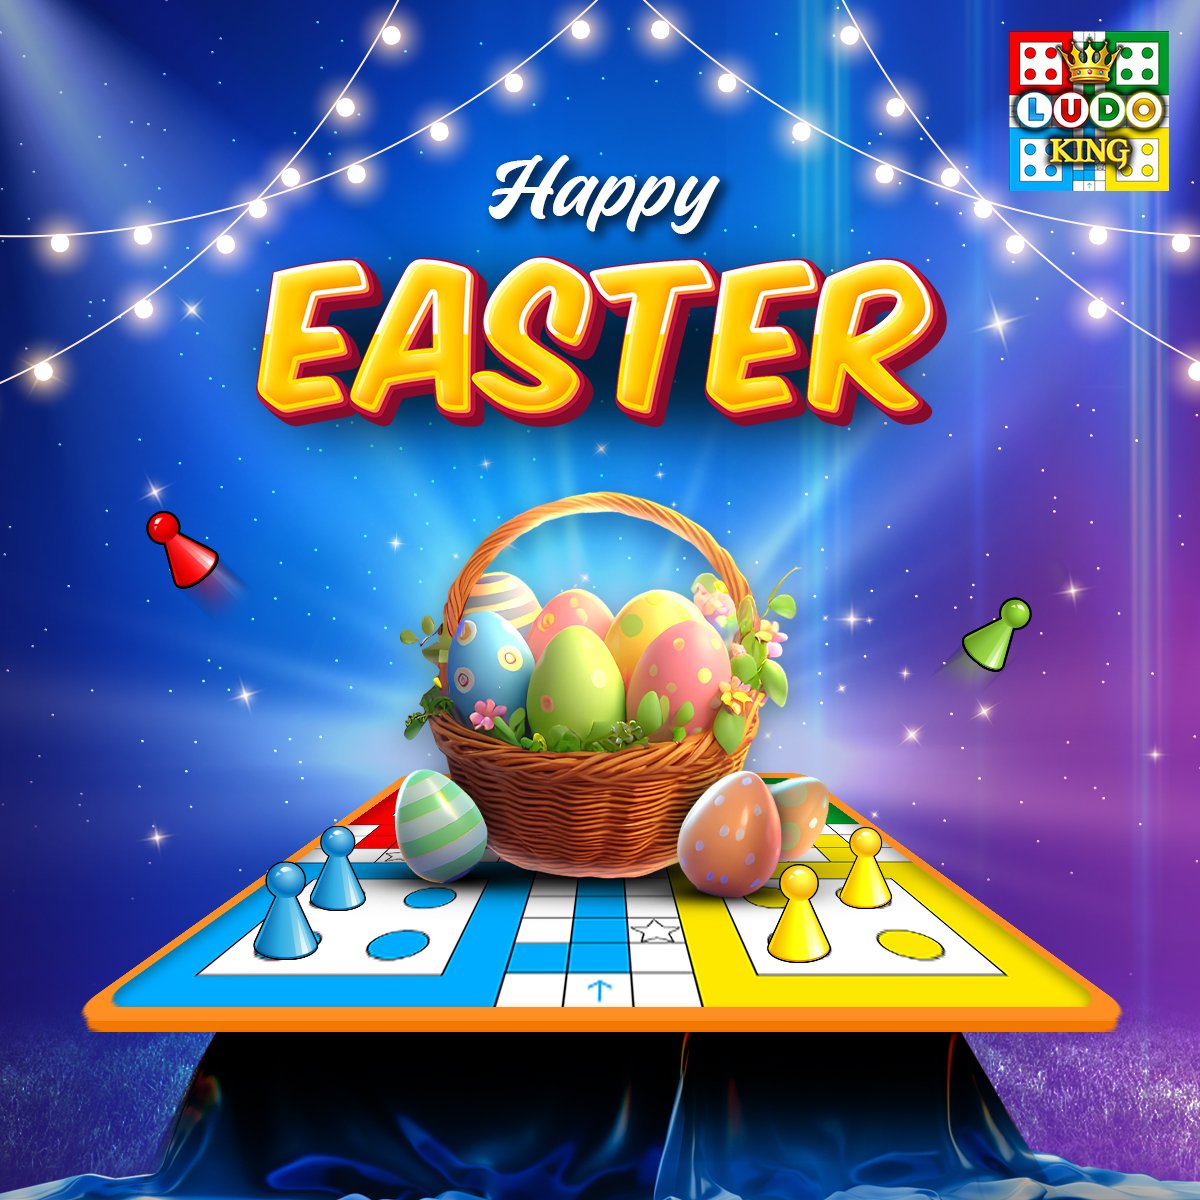 Wishing you a wonderful Easter 🐇 filled with love, peace, and happiness 😊 #easter #eastereggs #eastersunday #sunday #ludo #LudoKing #boardgames #mobilegames